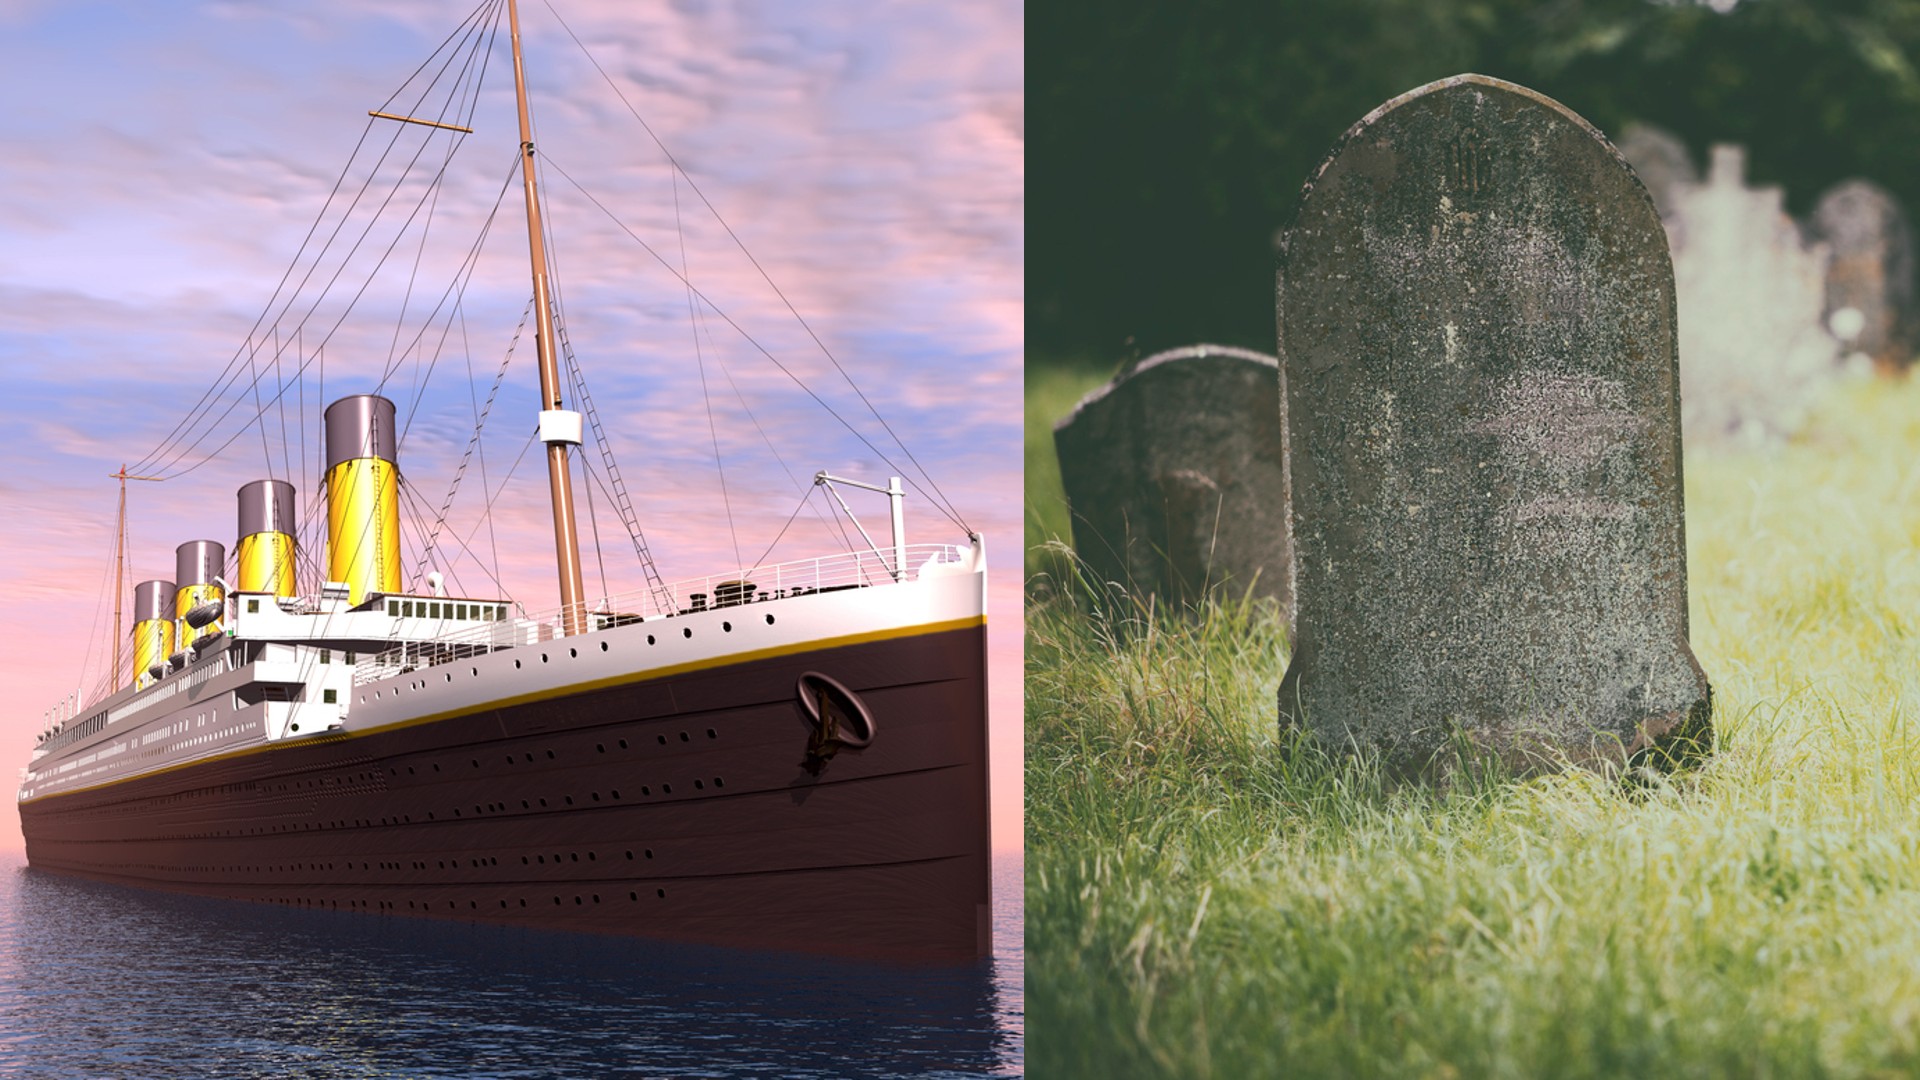 An image of the Titanic next to an image of a gravestone.